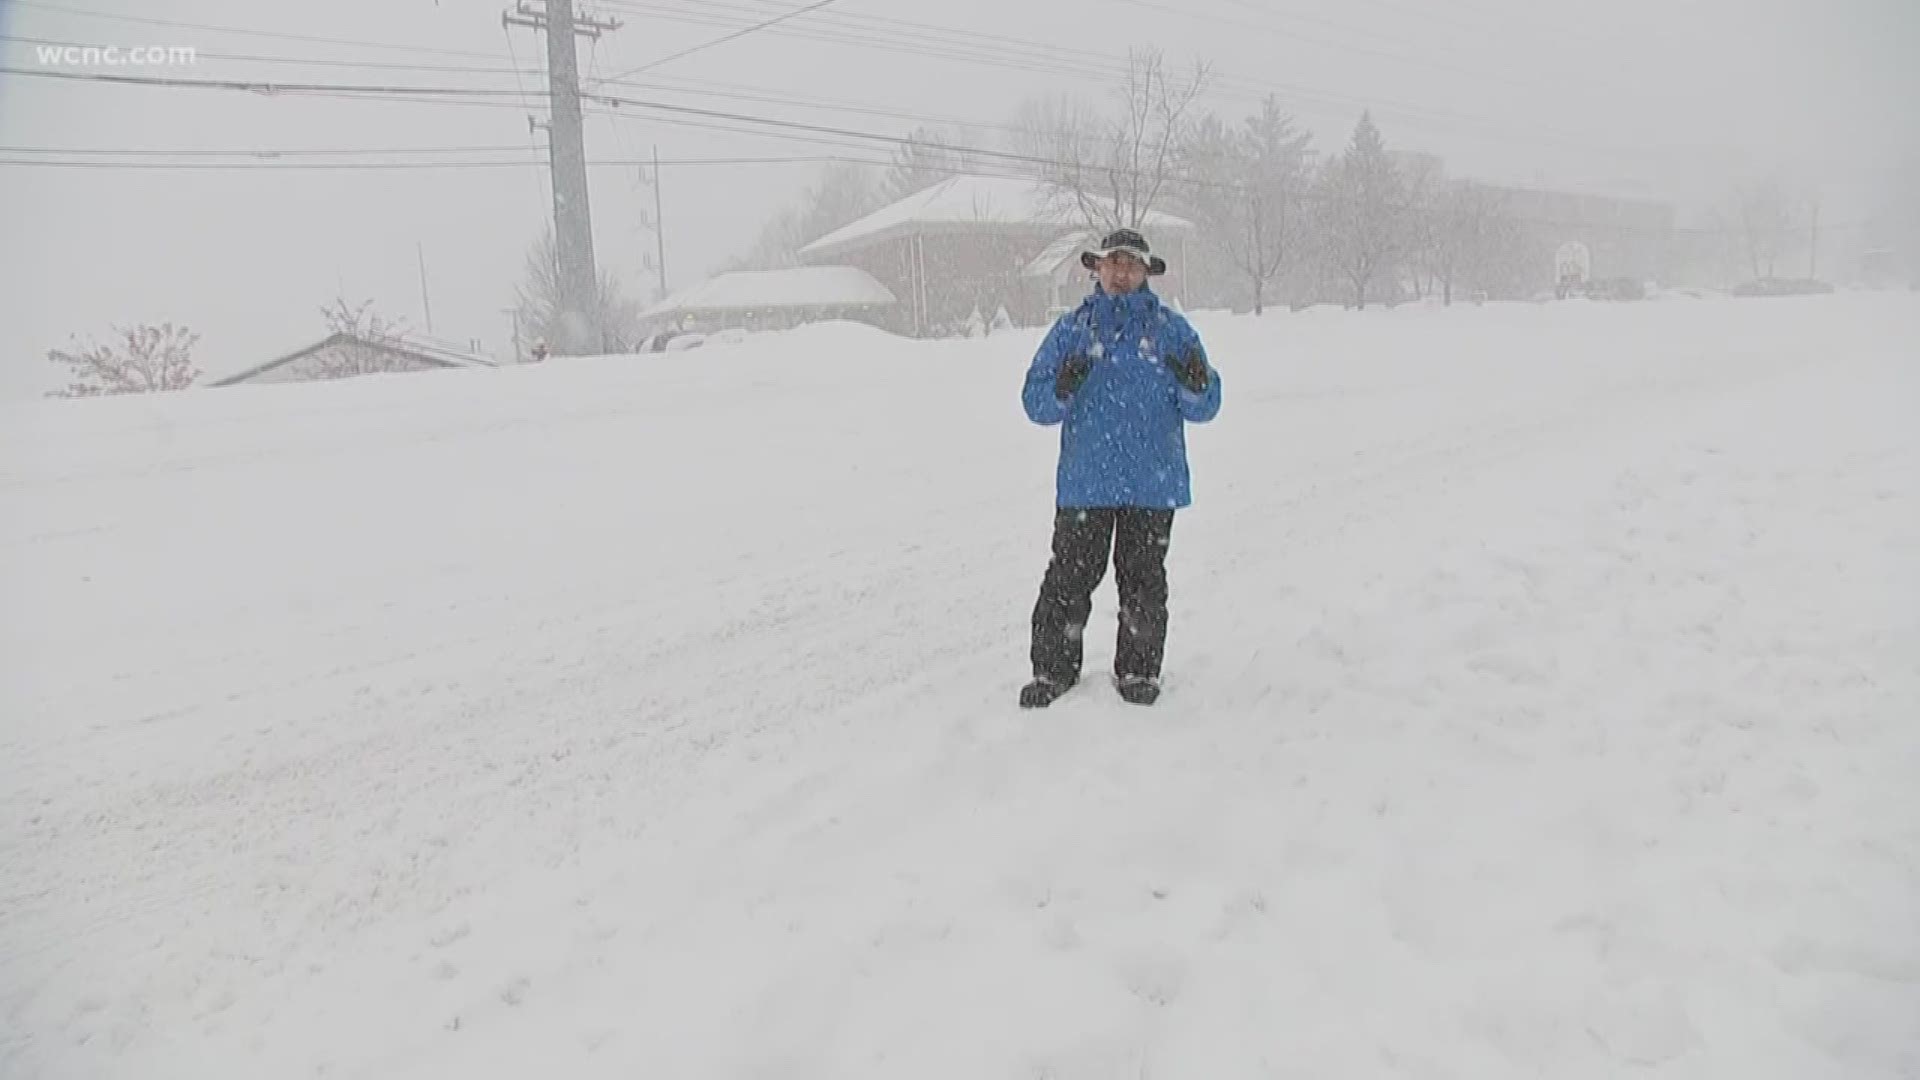 Jim Cantore from the Weather Channel is in Boone and he says this is setting up to be a record setting snow storm.